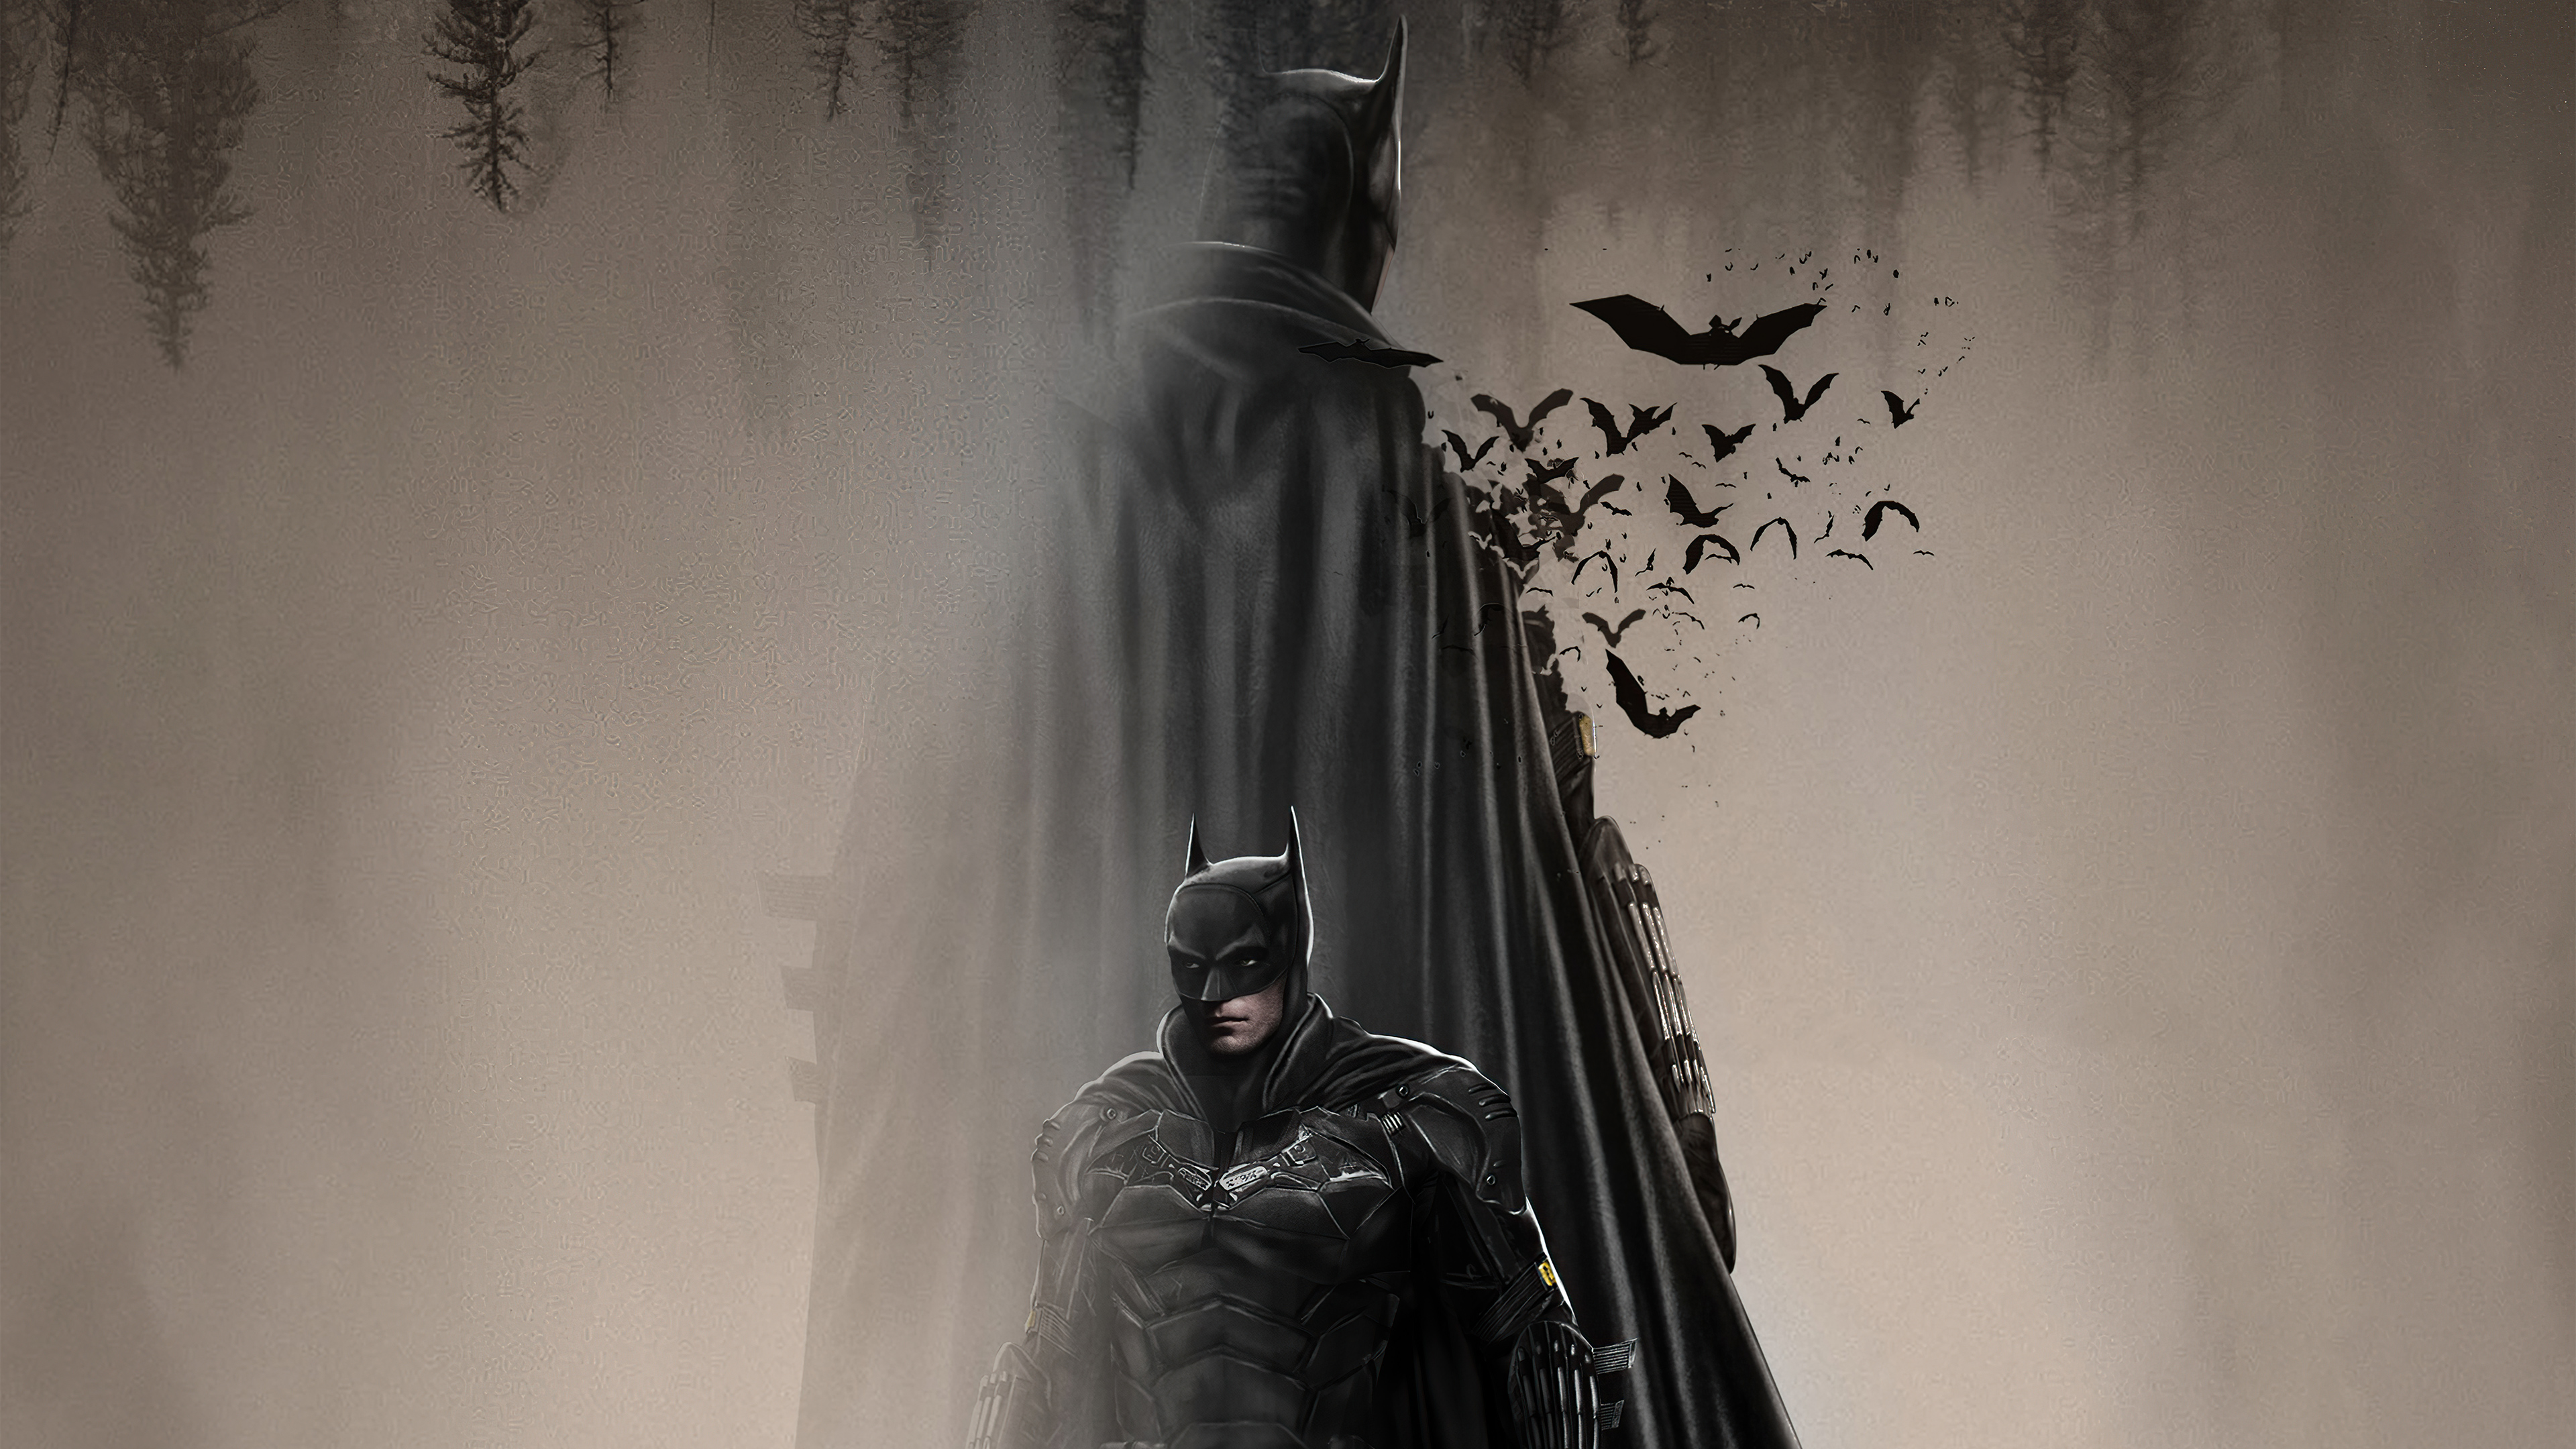 The Batman In Dust 4k, HD Movies, 4k Wallpapers, Images, Backgrounds,  Photos and Pictures